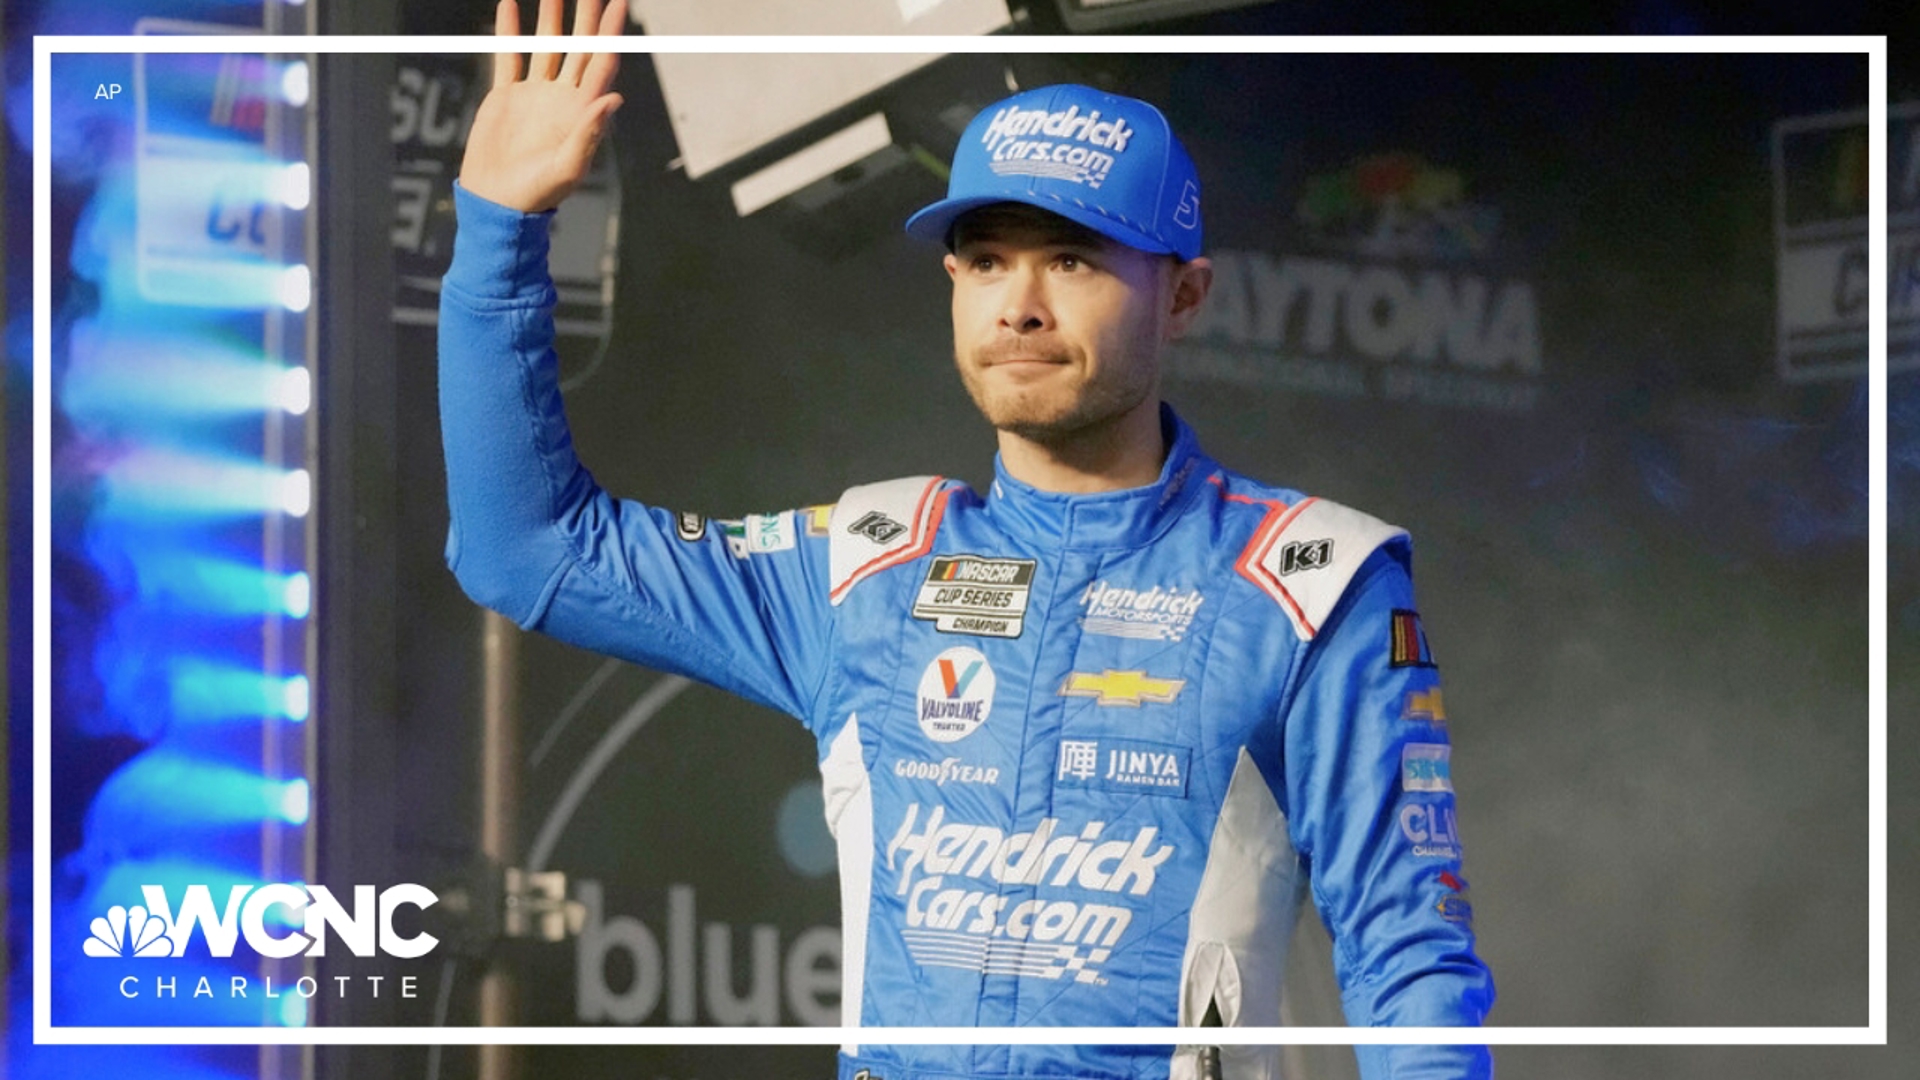 Kyle Larson will attempt the Indy 500 and Coke 600 on the same day this Sunday.